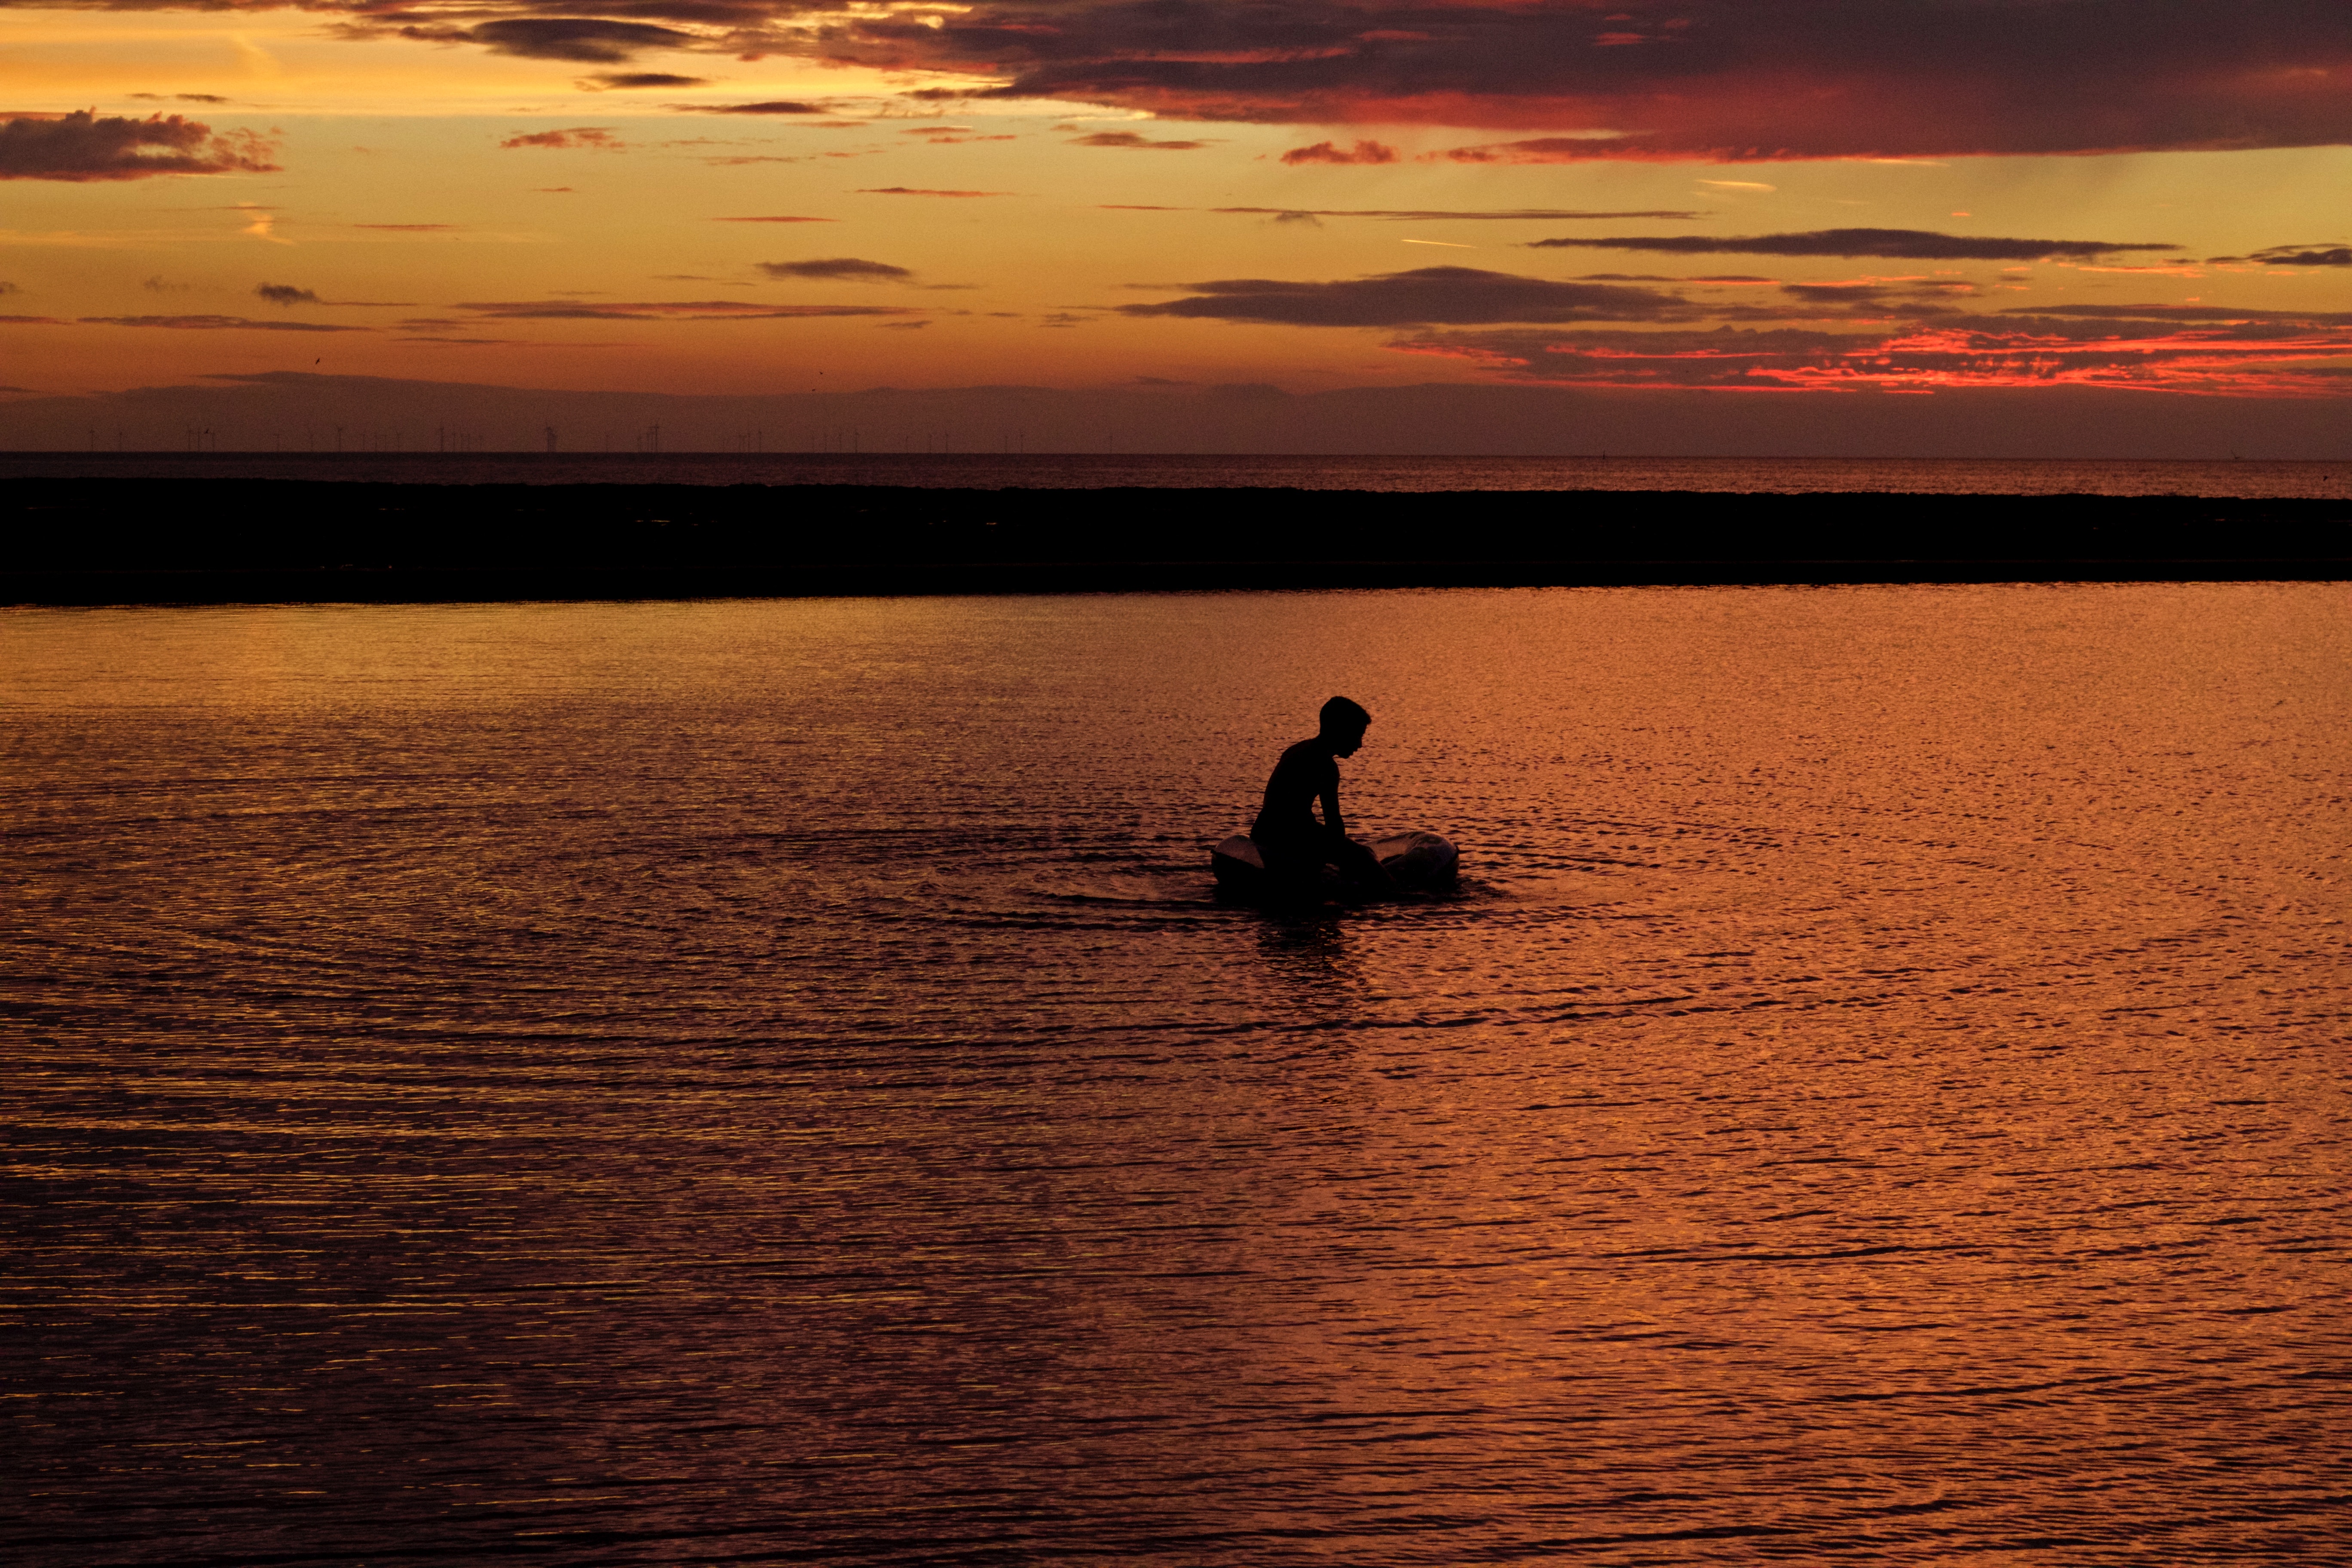 Silhouette of person on body of water during sunset photo